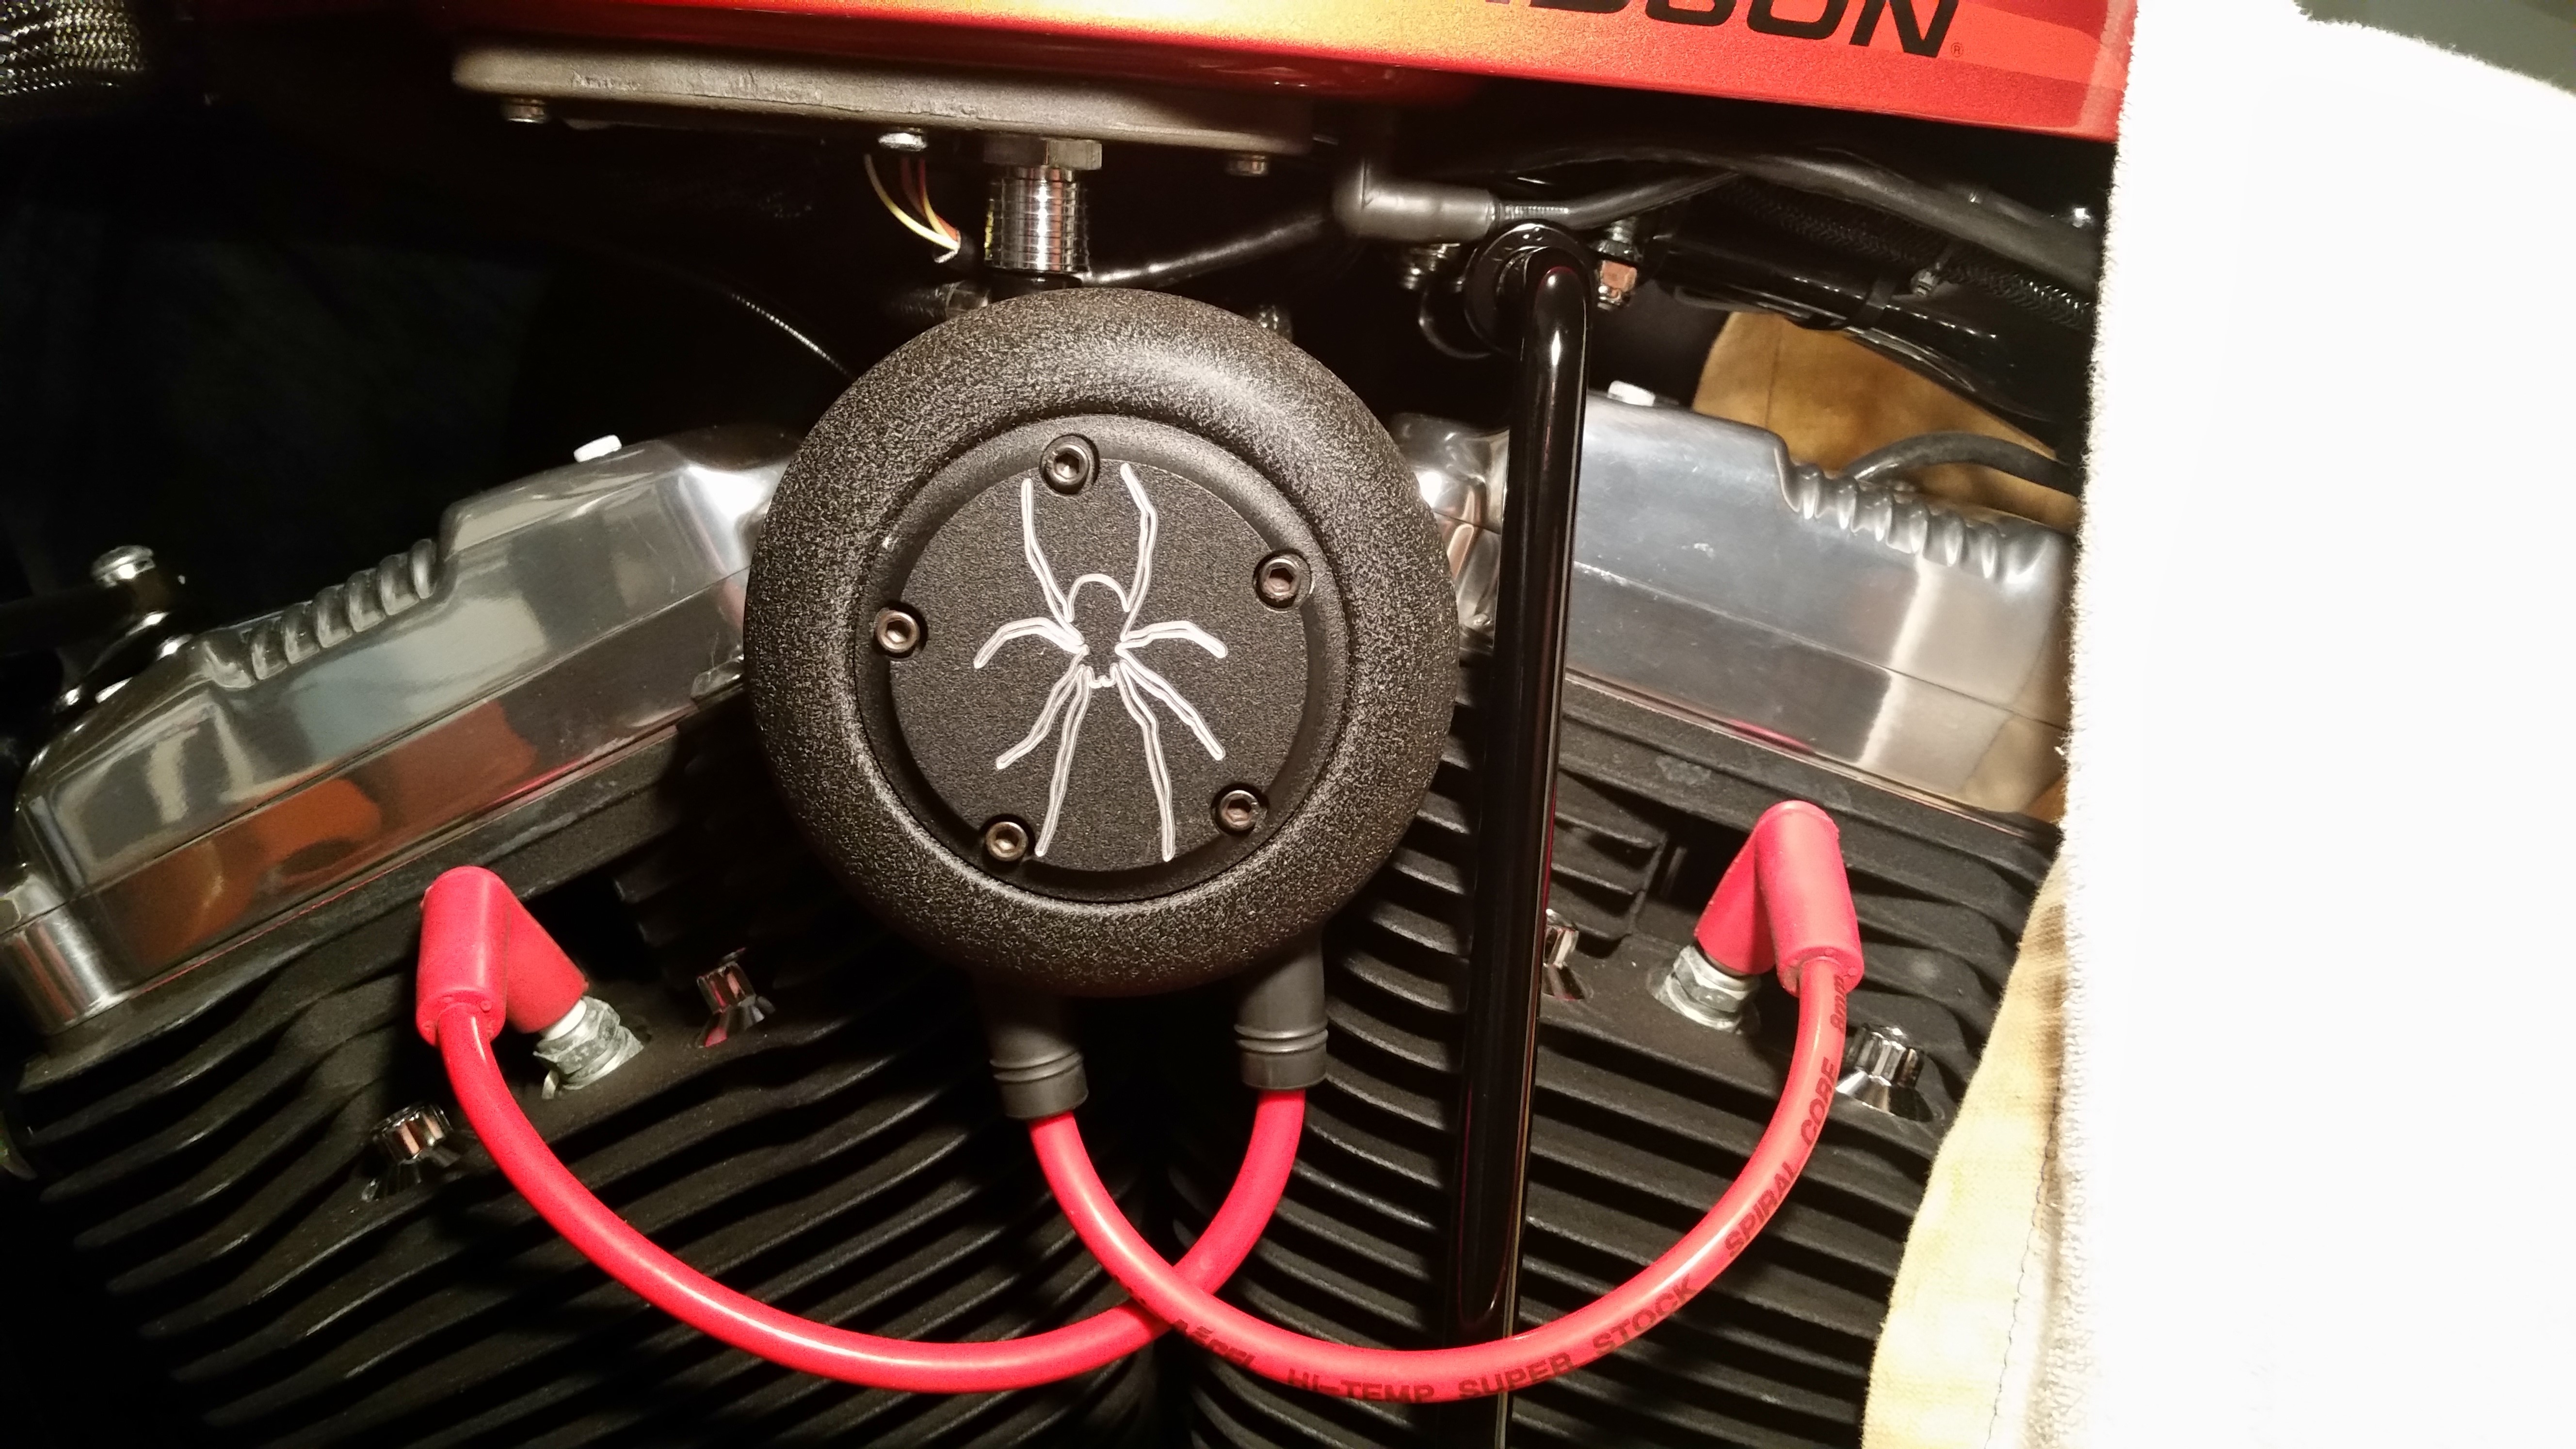 How to Wire A Coil On A Harley Anyone Made there Own Coil Bracket Harley Davidson forums